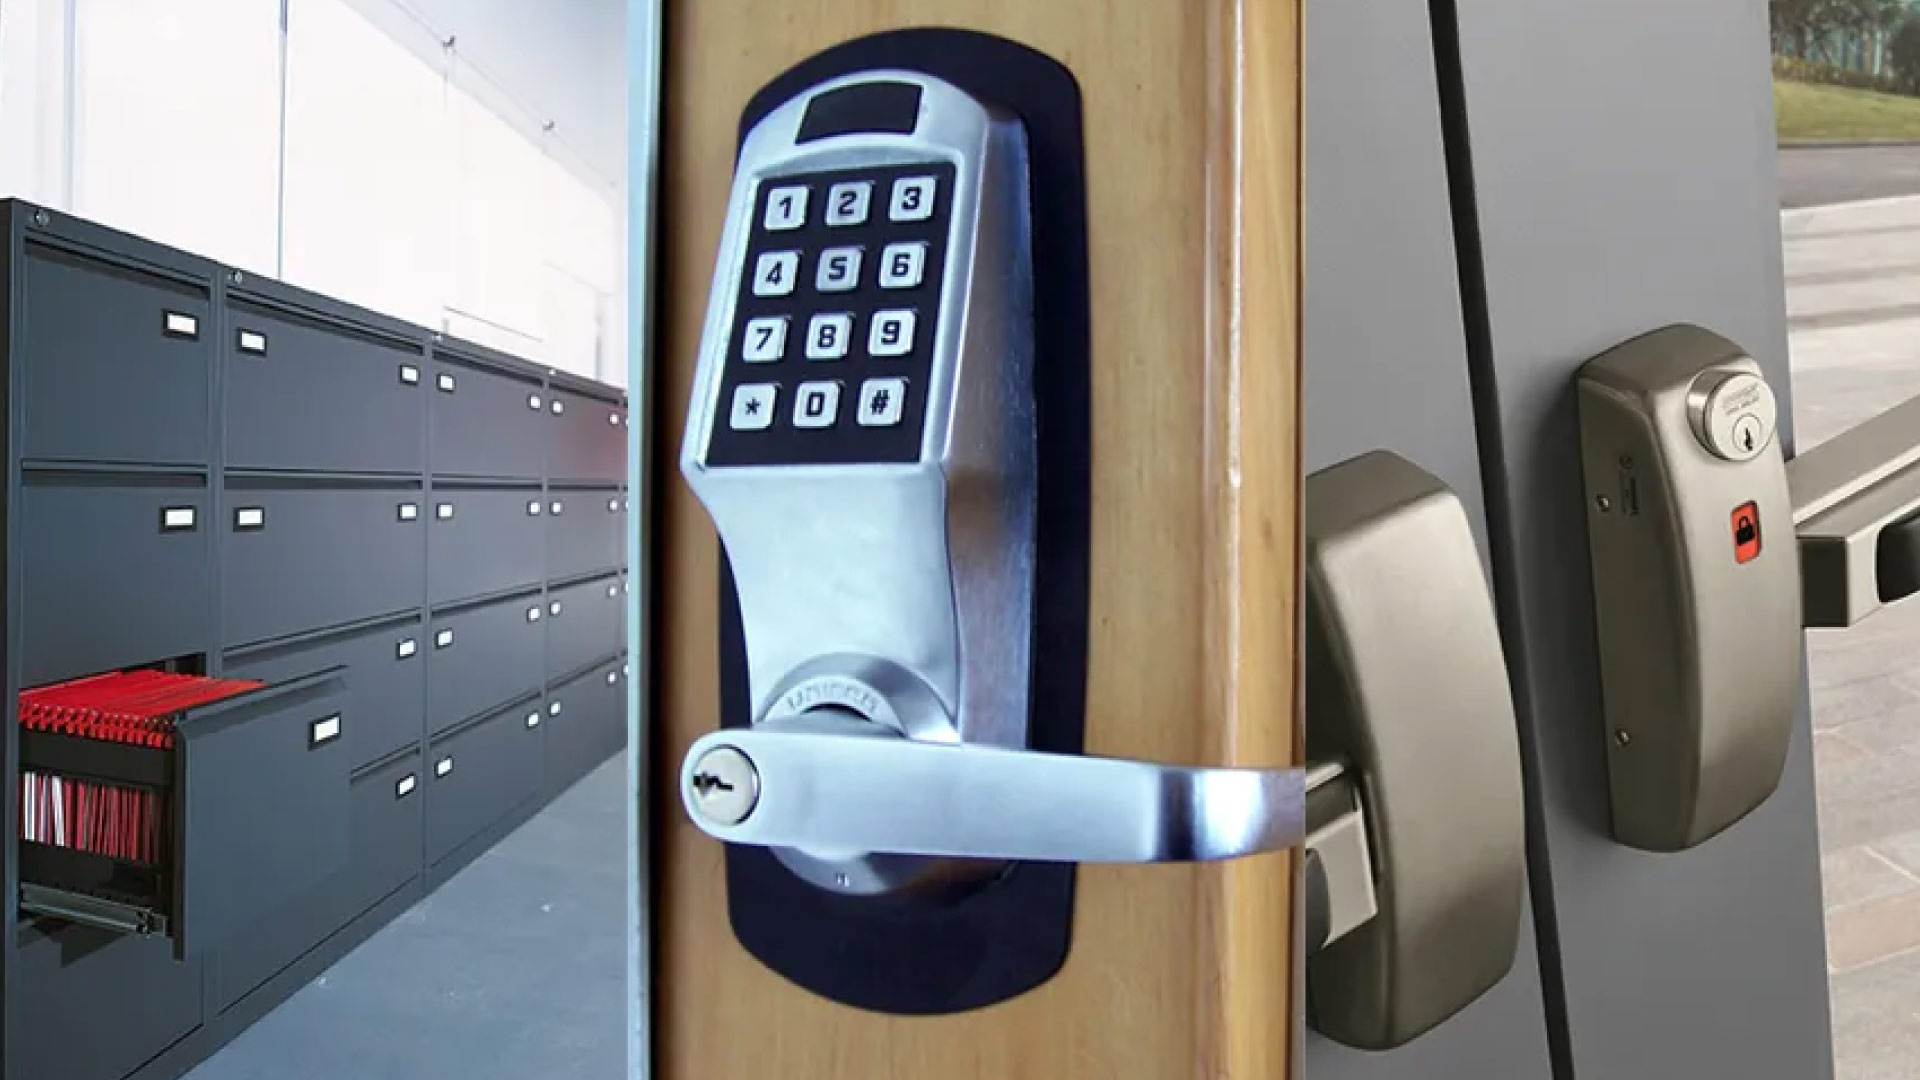 Commercial Locksmith Service in Charlotte, NC